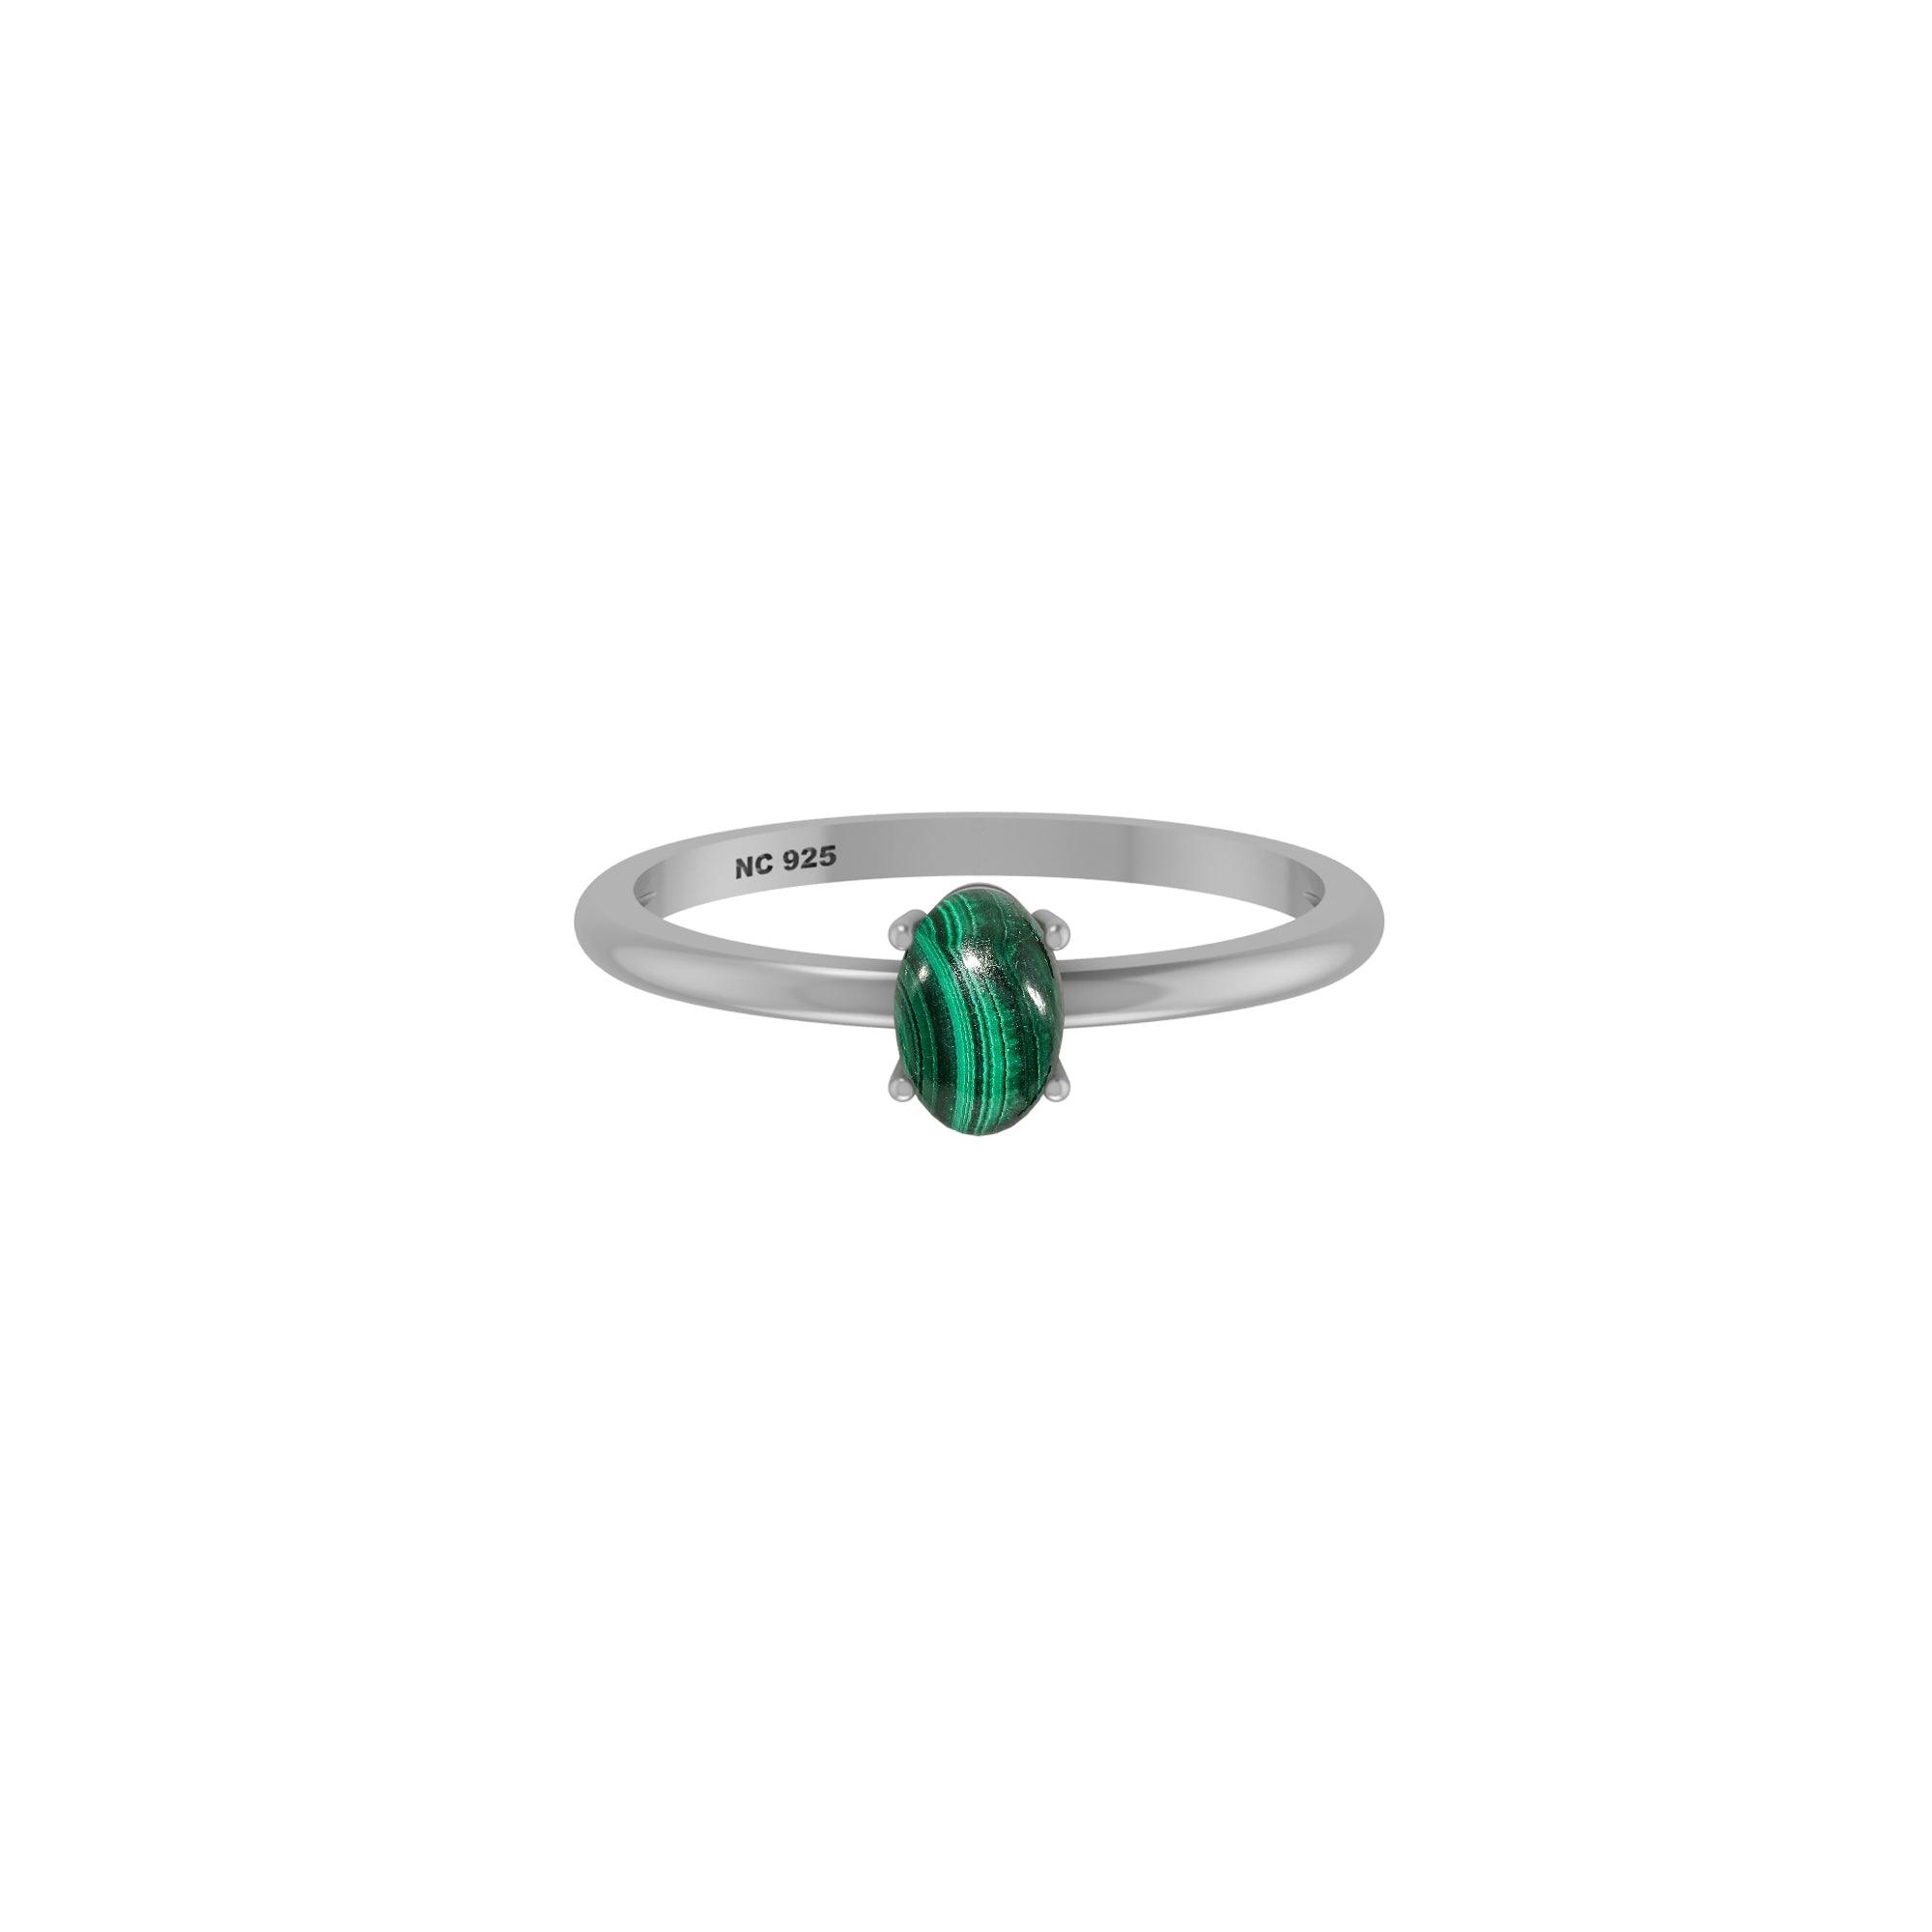 925 Sterling Silver Natural Malachite Stackable Ring Prong Set Jewelry Pack of 12